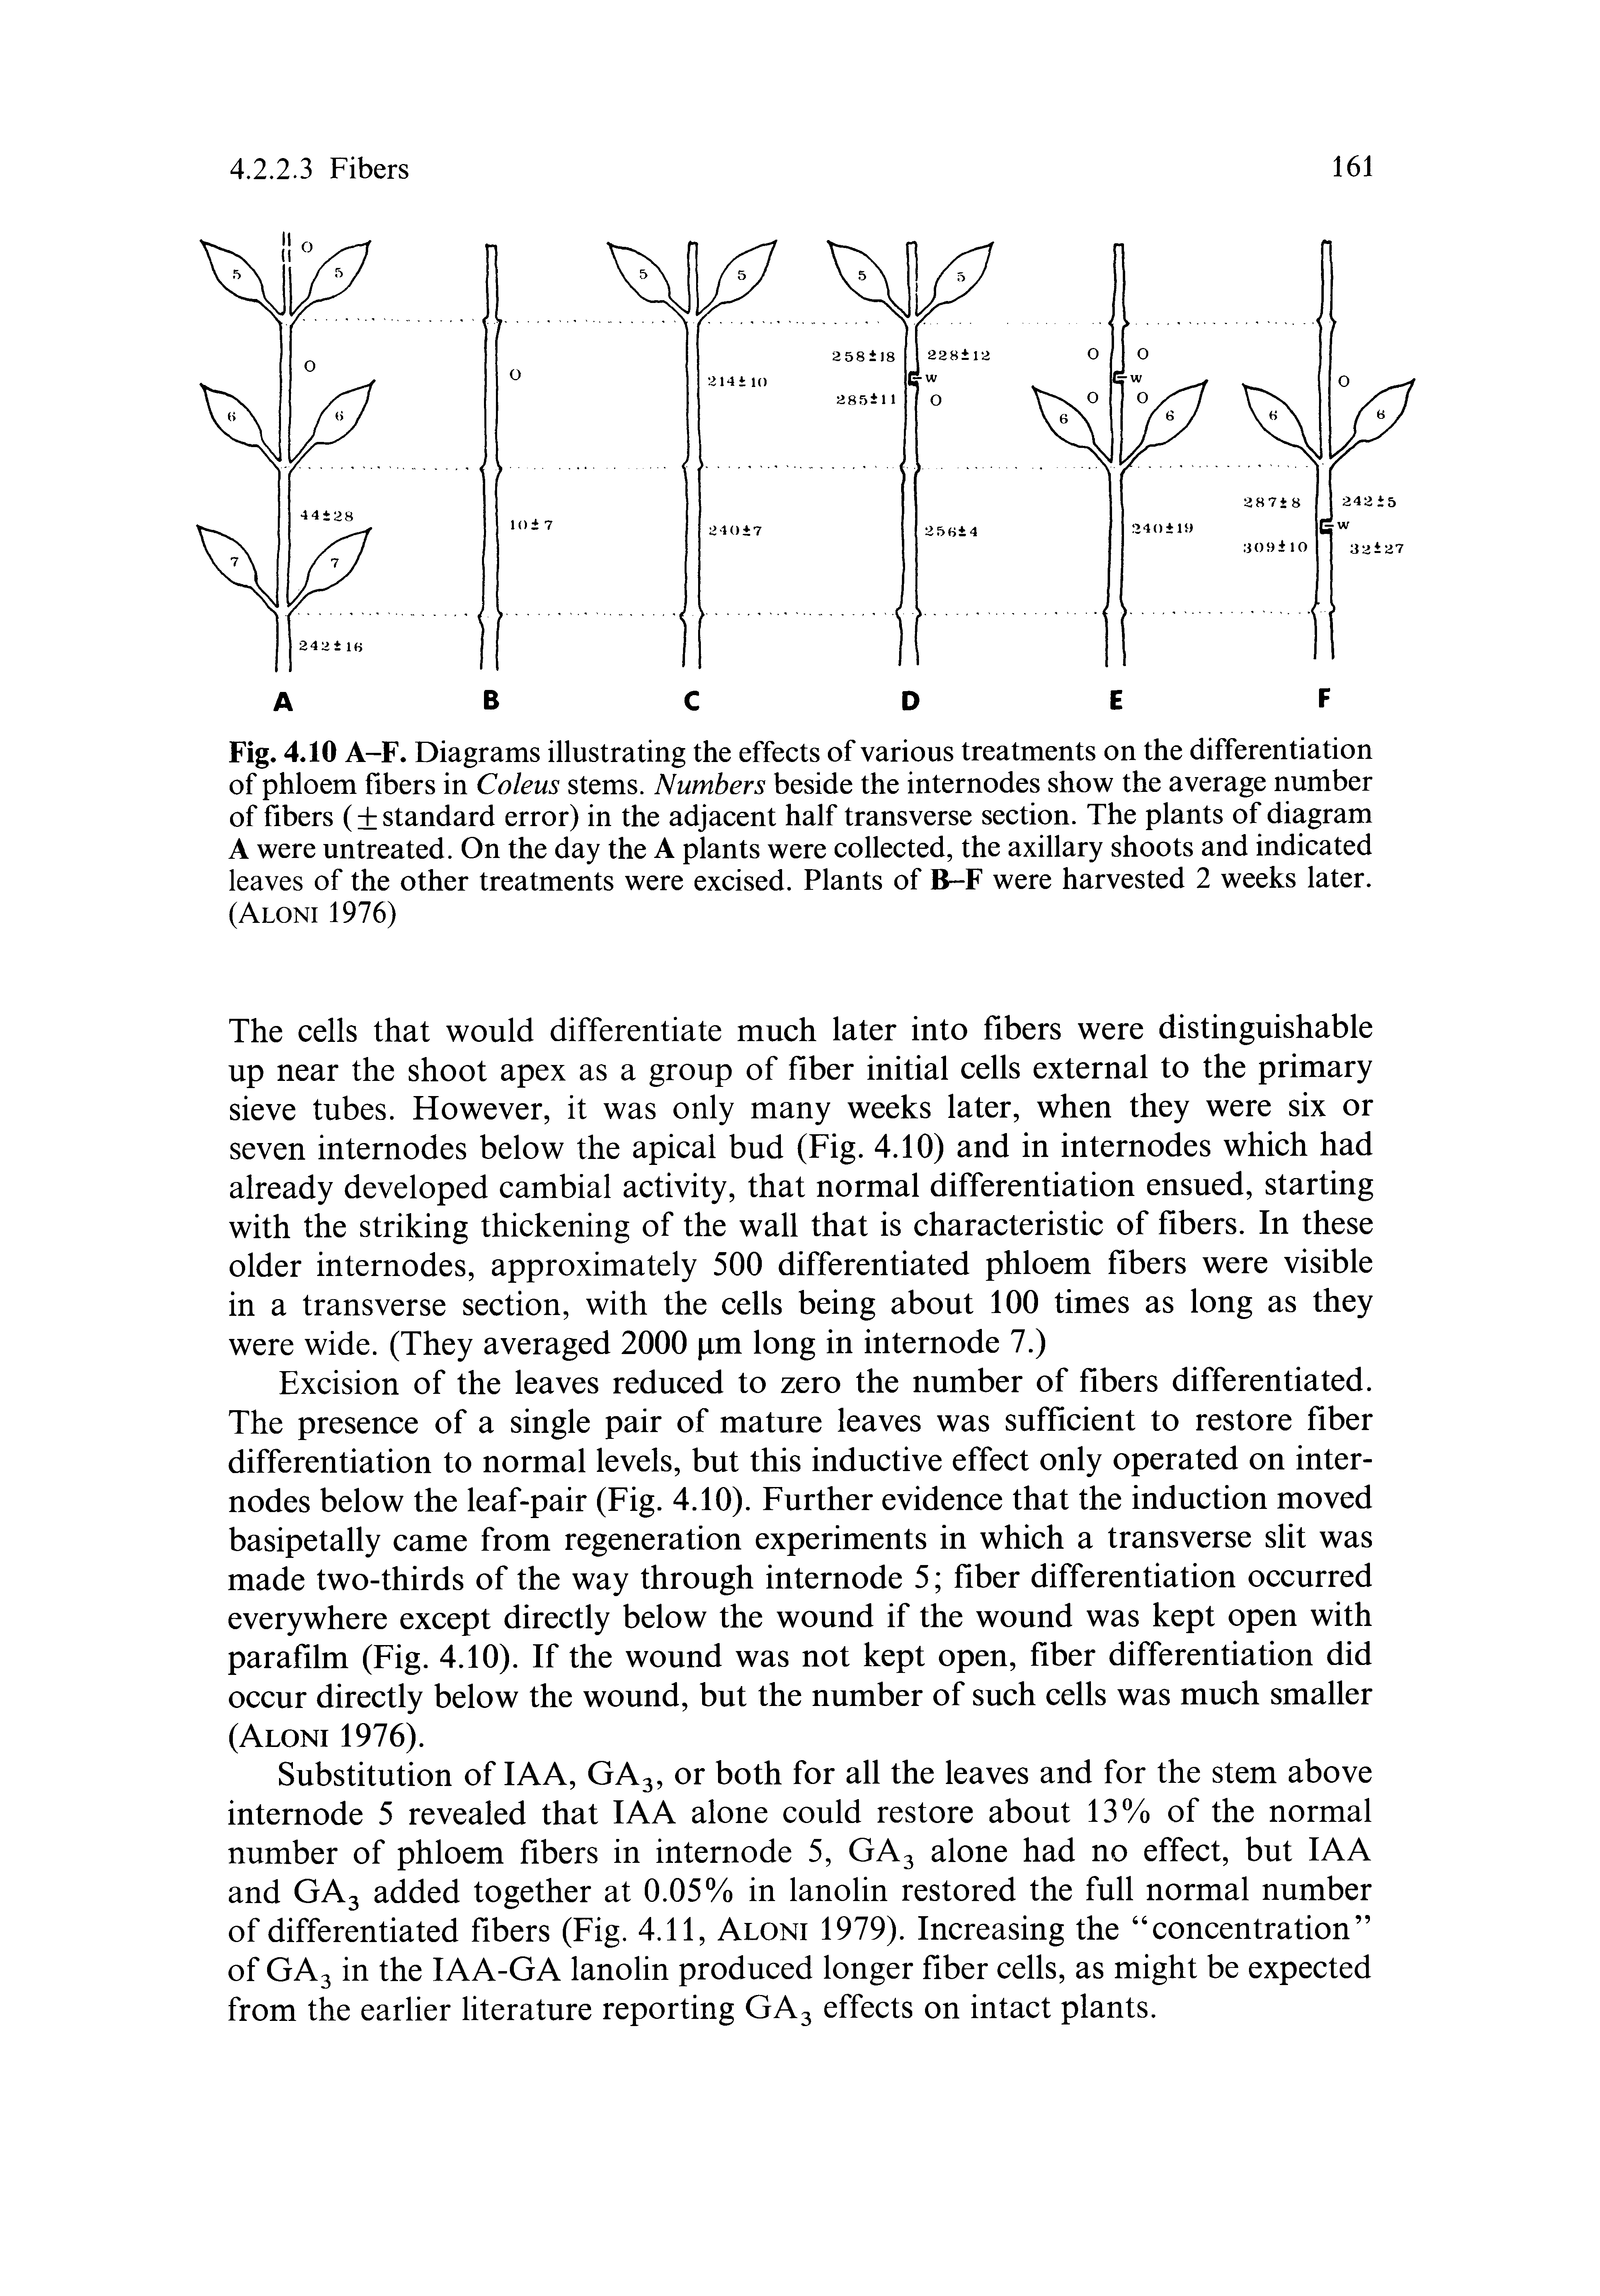 Fig. 4.10 A-F. Diagrams illustrating the effects of various treatments on the differentiation of phloem fibers in Coleus stems. Numbers beside the internodes show the average number of fibers ( standard error) in the adjacent half transverse section. The plants of diagram A were untreated. On the day the A plants were collected, the axillary shoots and indicated leaves of the other treatments were excised. Plants of B F were harvested 2 weeks later. (Aloni 1976)...